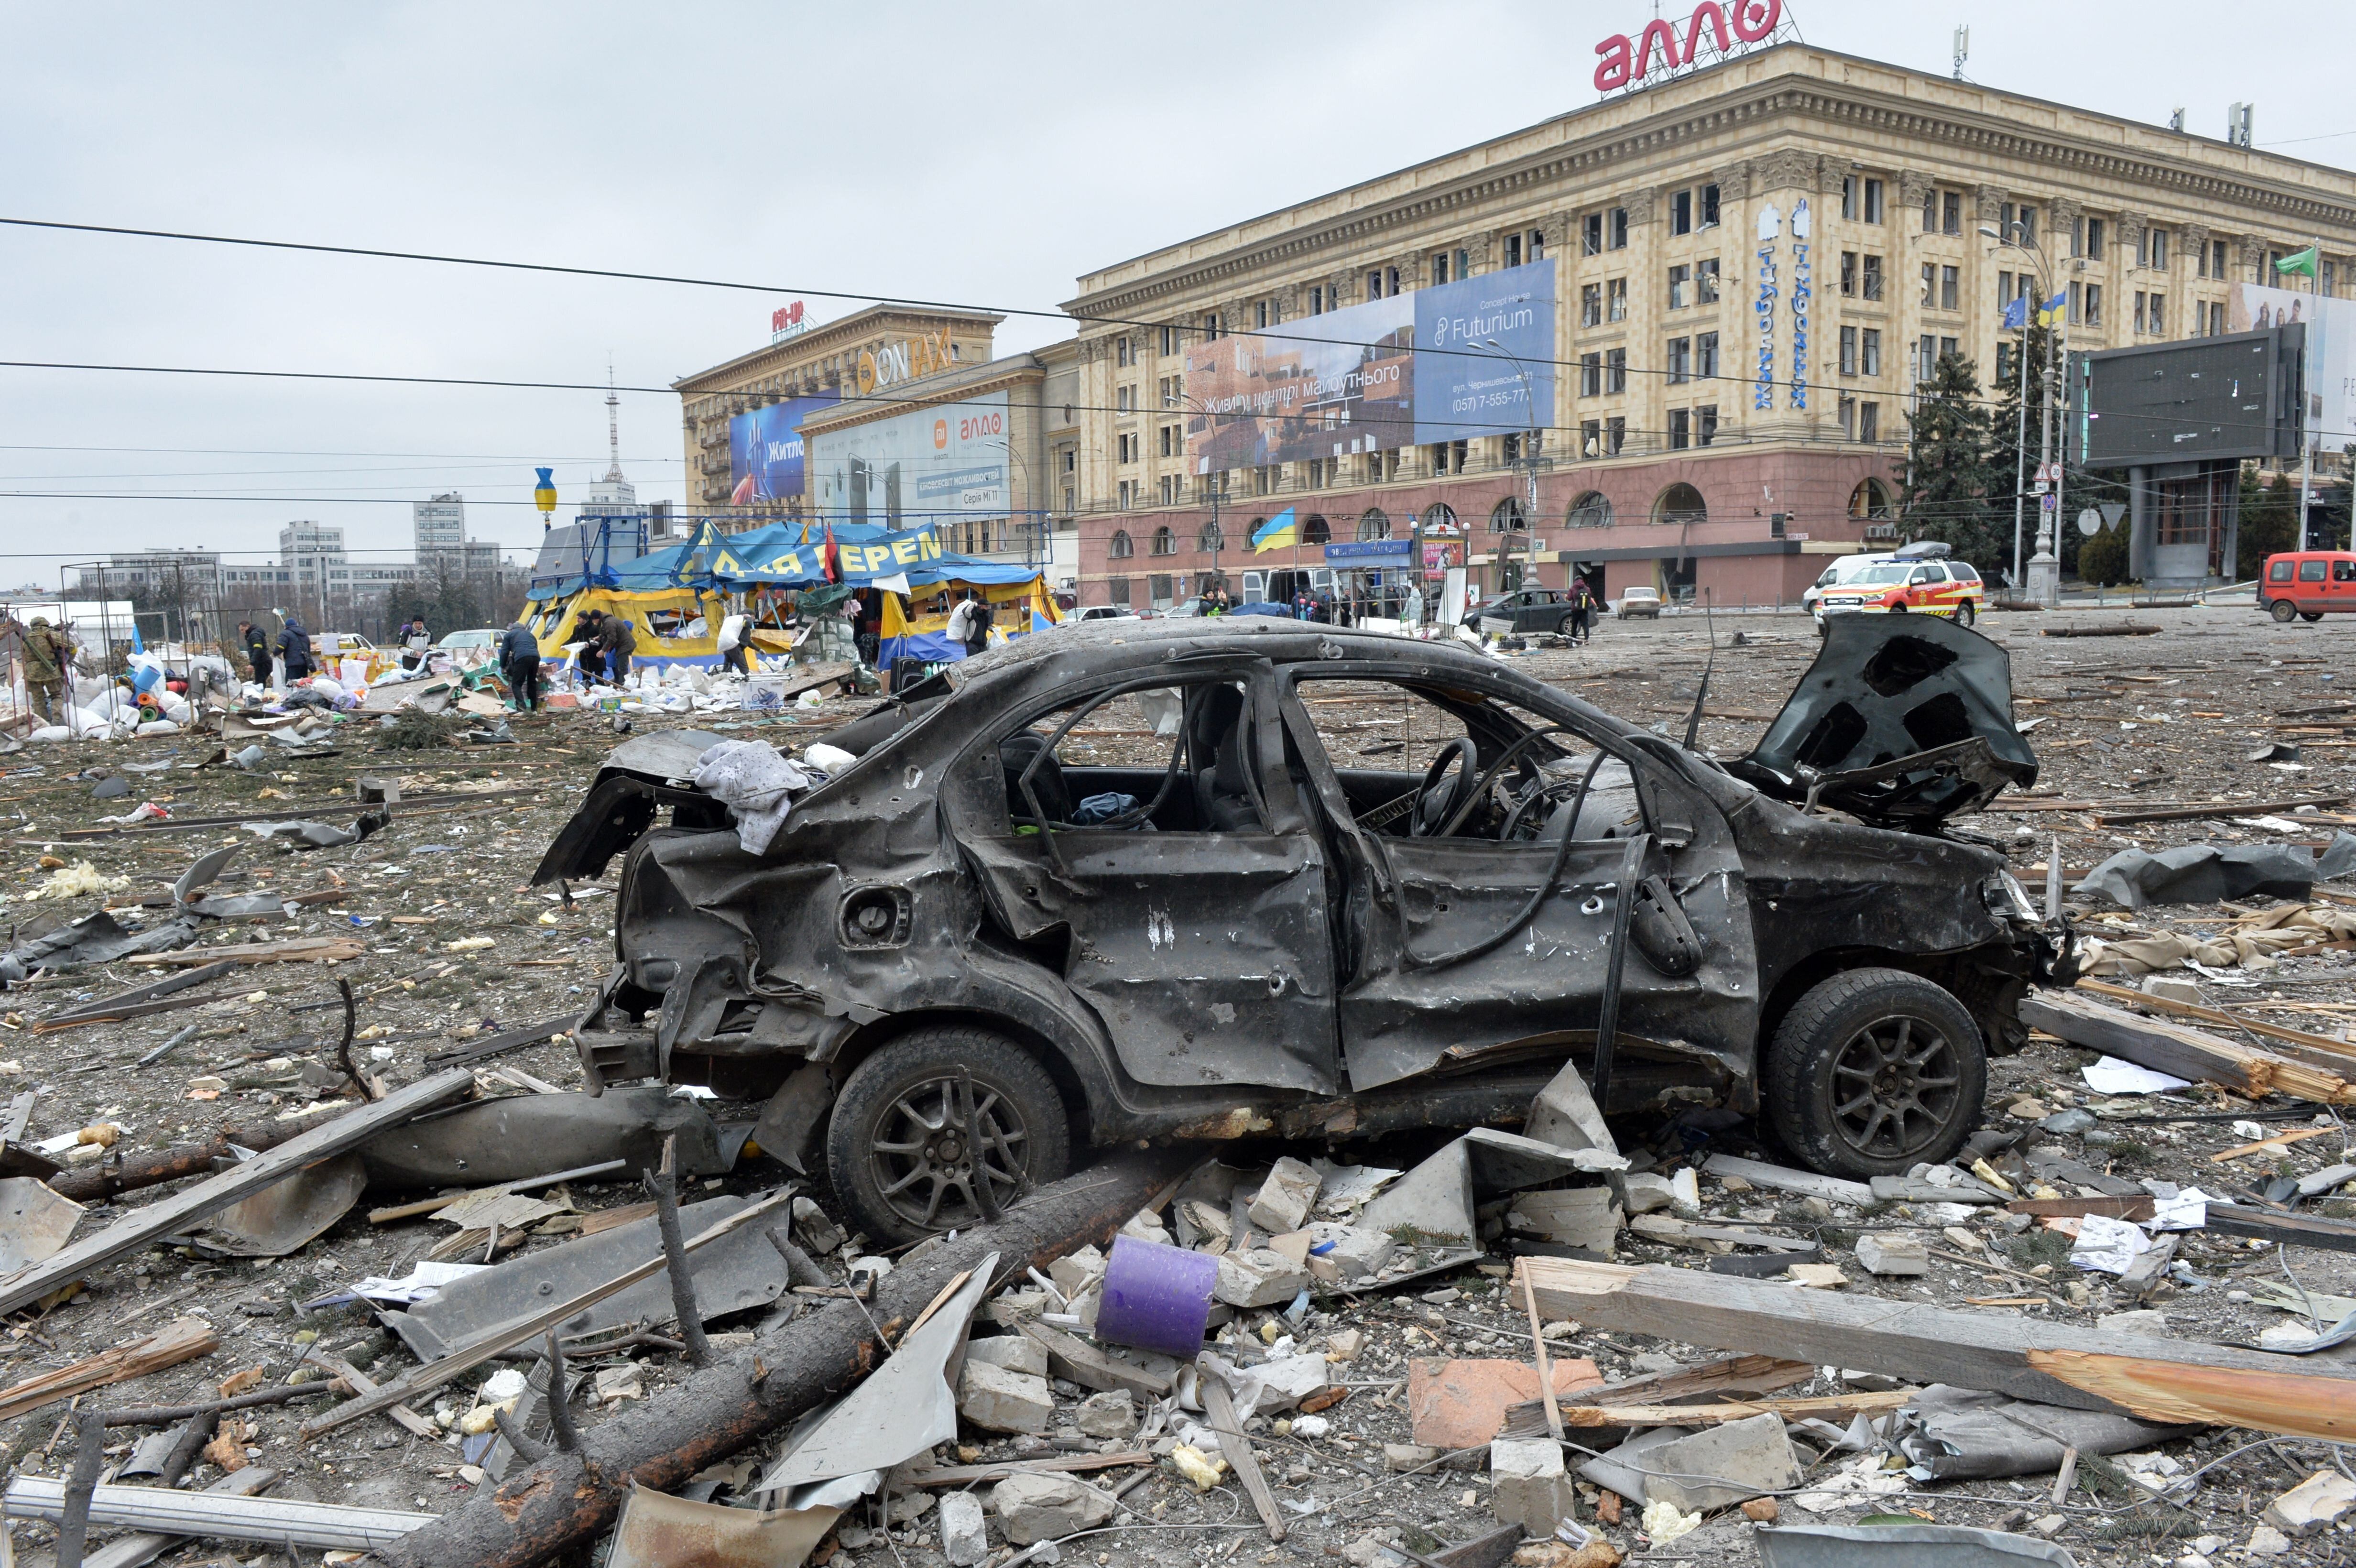 A view of the square outside the damaged local city hall of Kharkiv on March 1, 2022, destroyed as a result of Russian troop shelling. (Photo by SERGEY BOBOK/AFP via Getty Images)